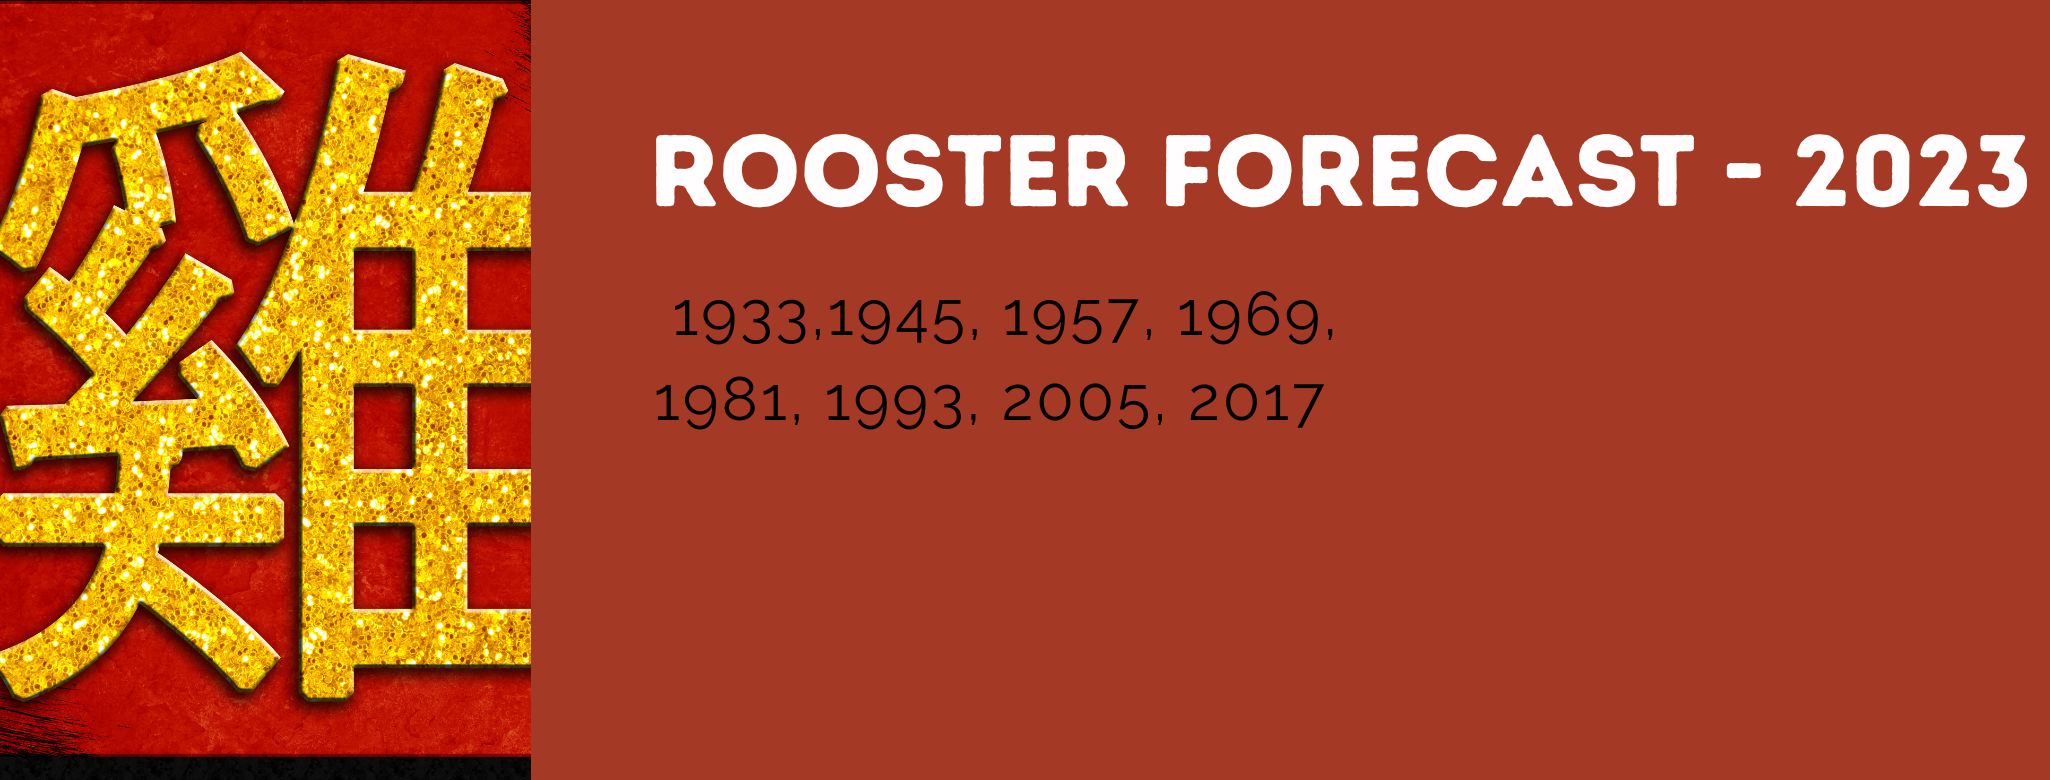 Rooster Chinese Zodiac Forecast - 2023